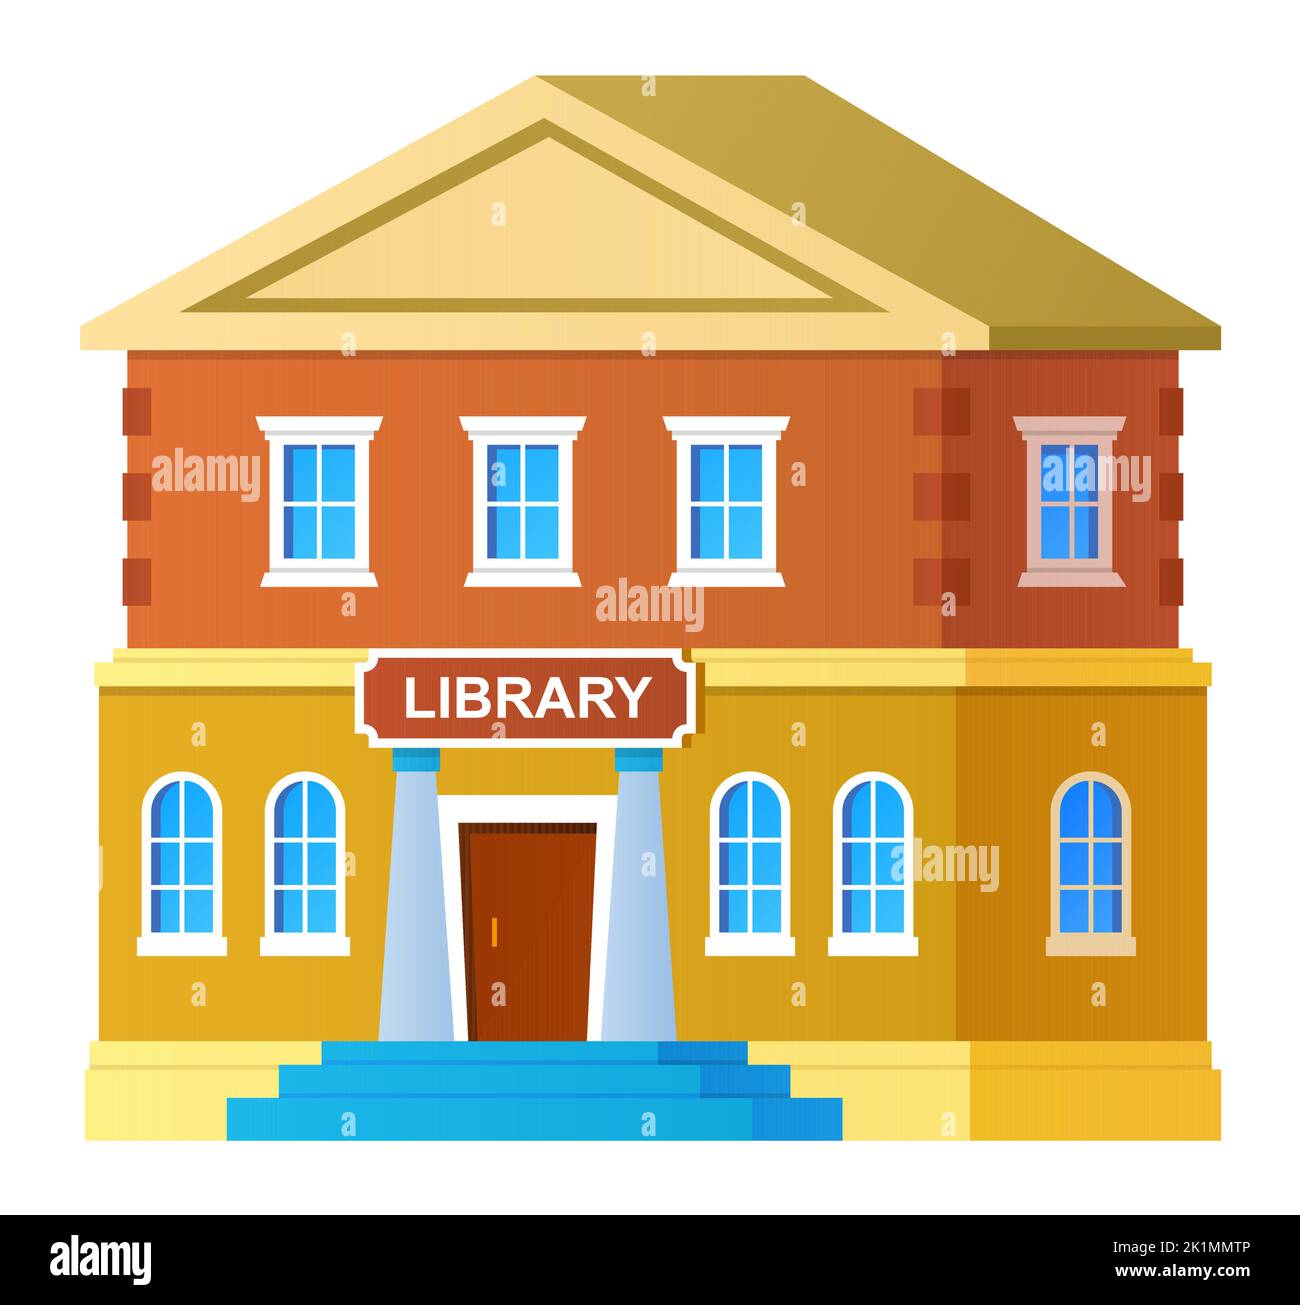 Library - modern flat design style single isolated image Stock Vector